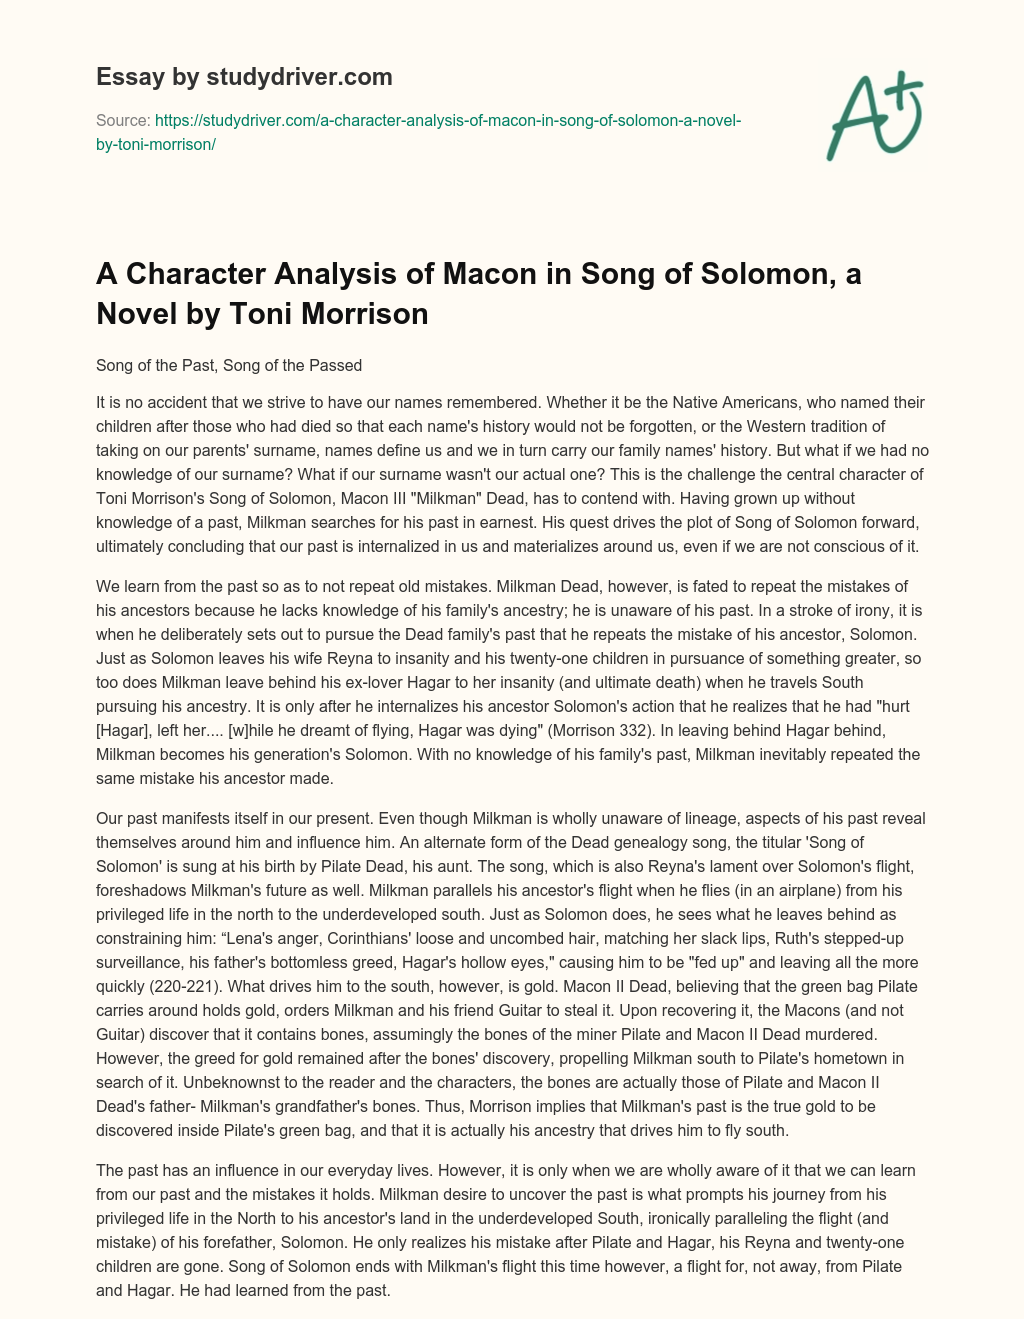 A Character Analysis of Macon in Song of Solomon, a Novel by Toni Morrison essay